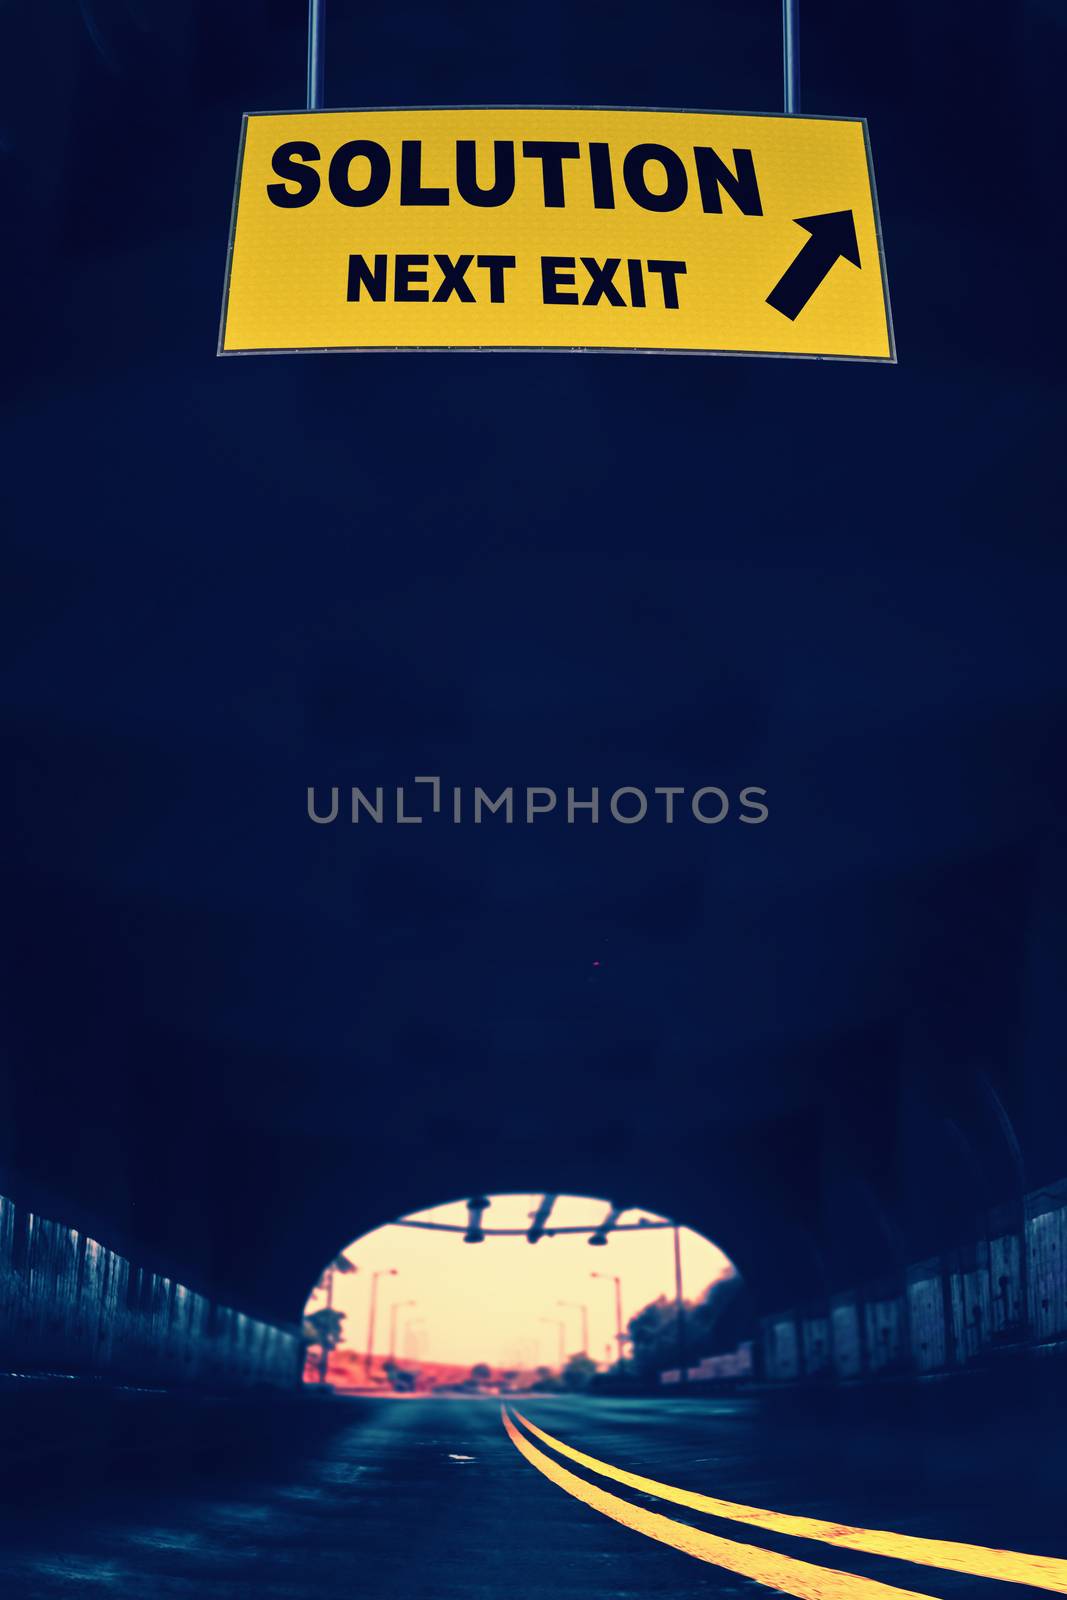 Solution Next Exit Concept by yands